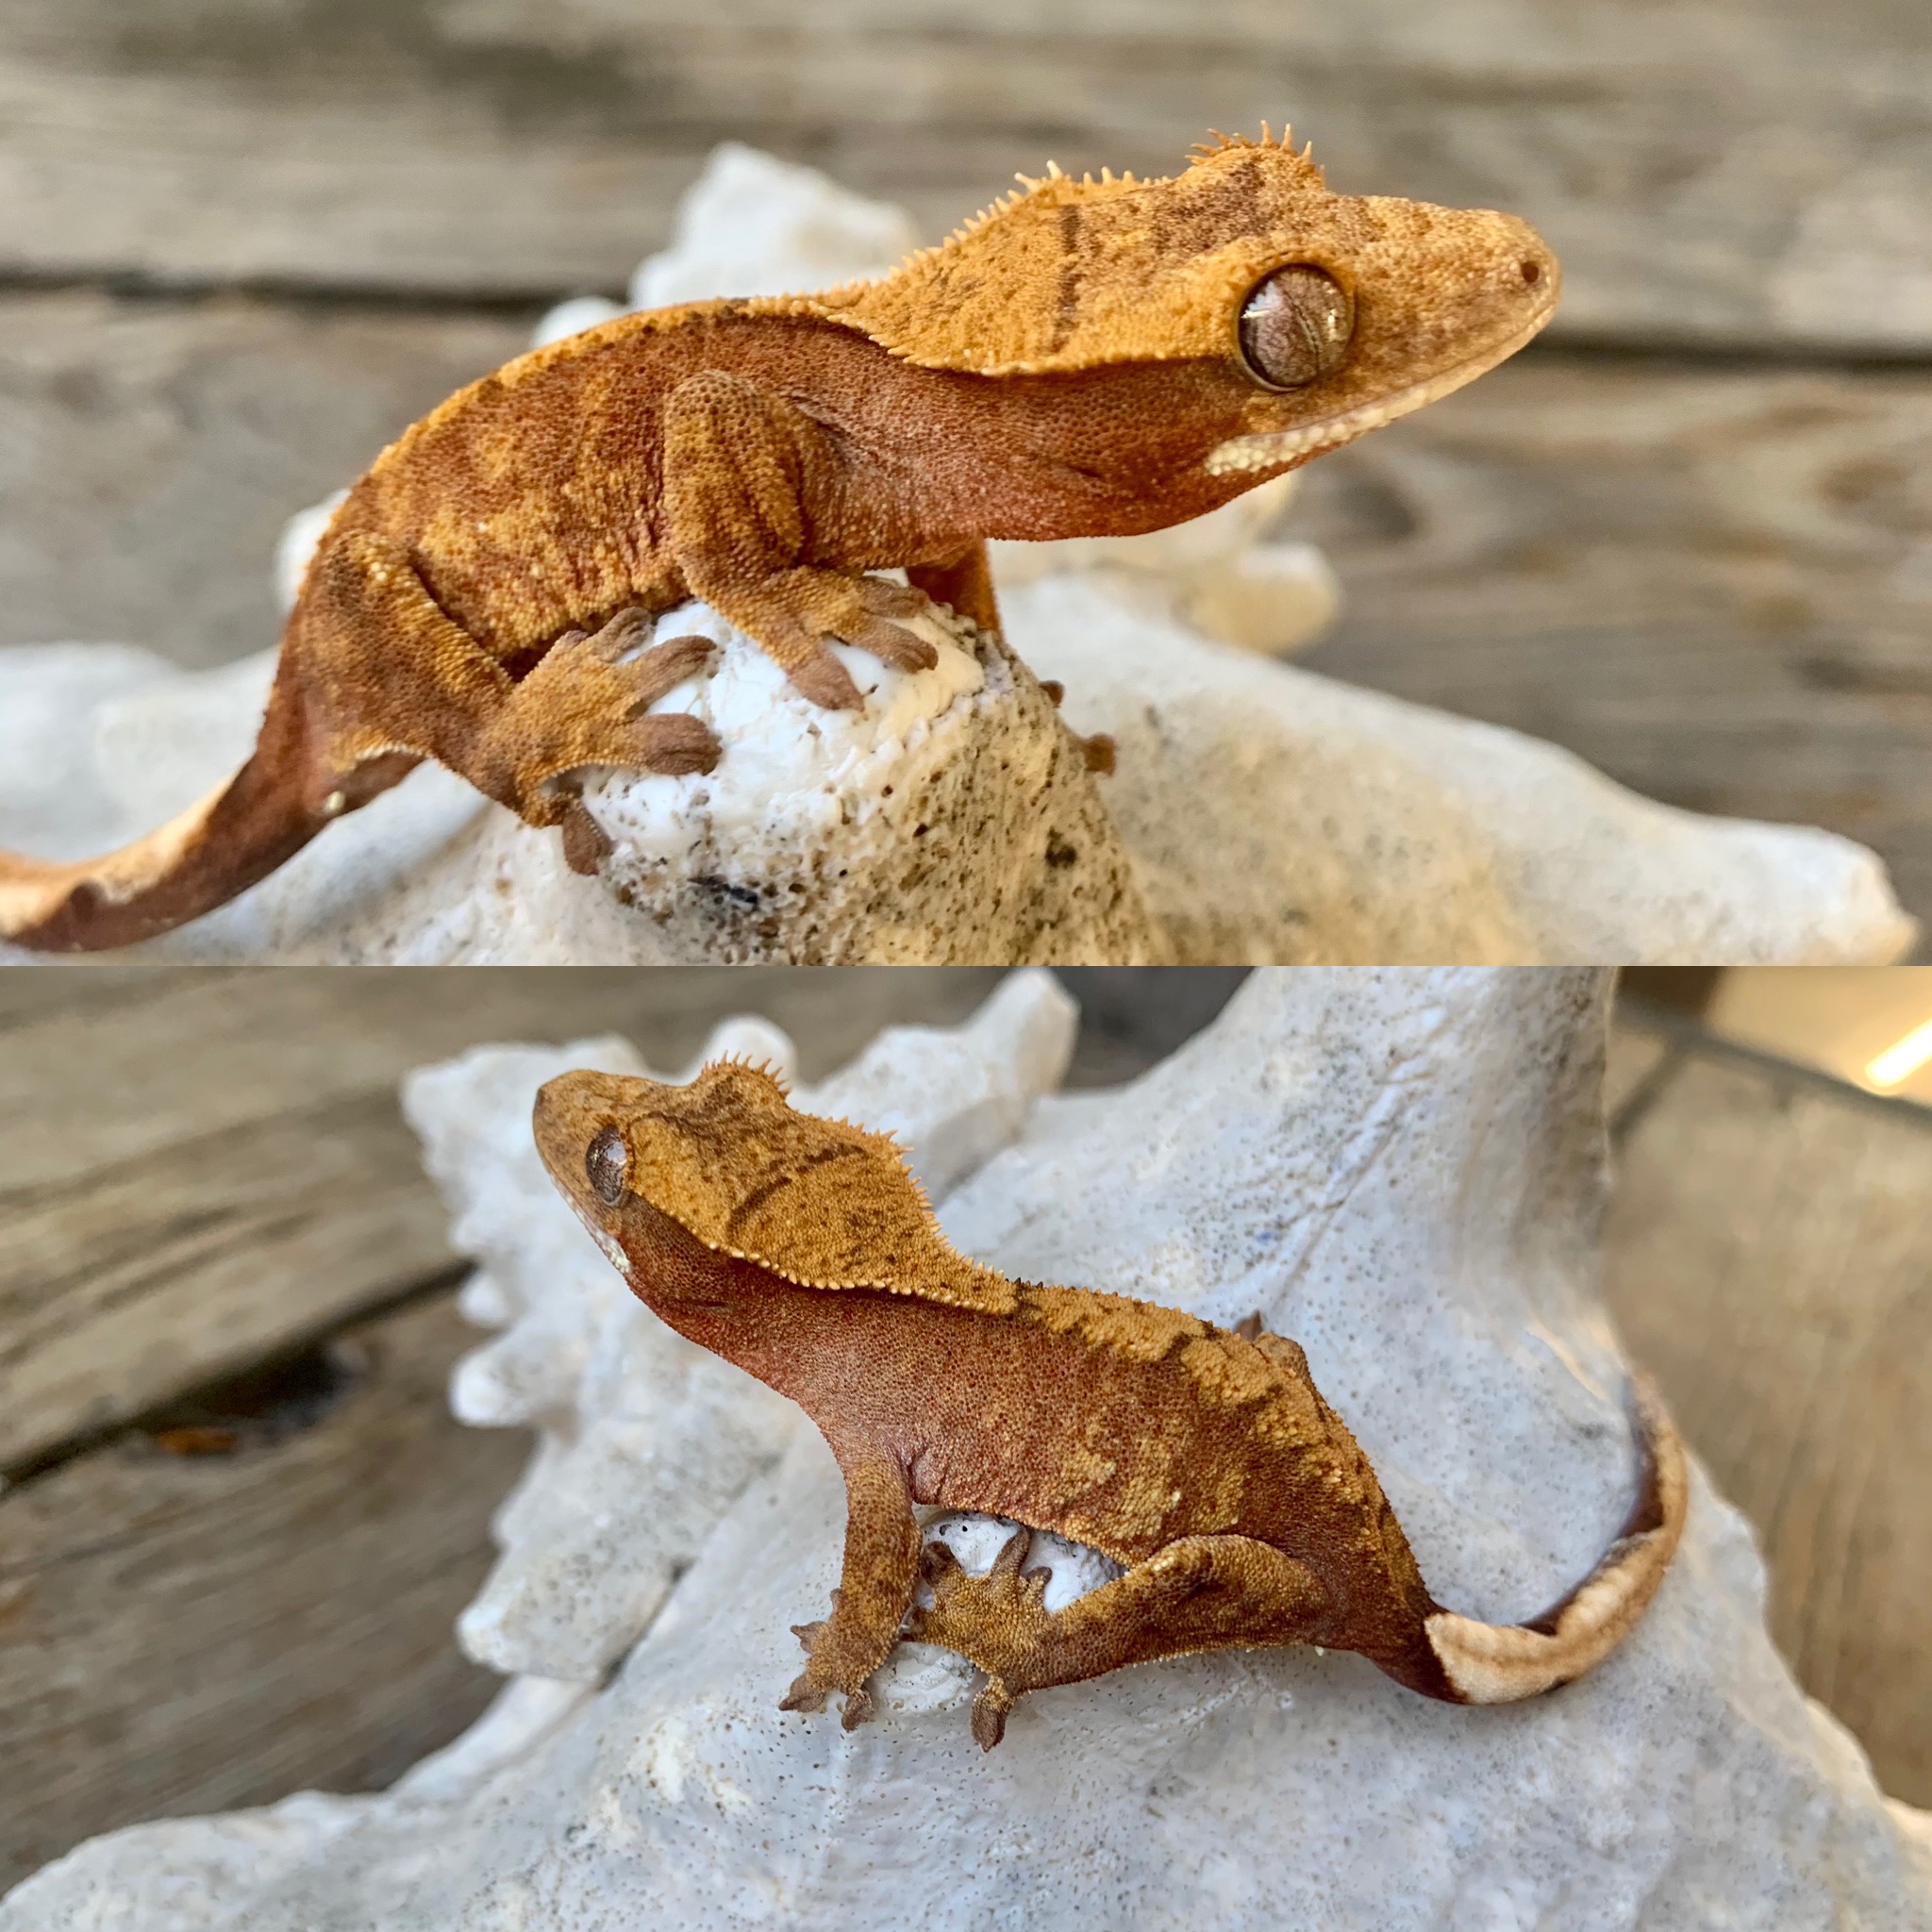 Red Crested Gecko by Spring Loaded Cresties